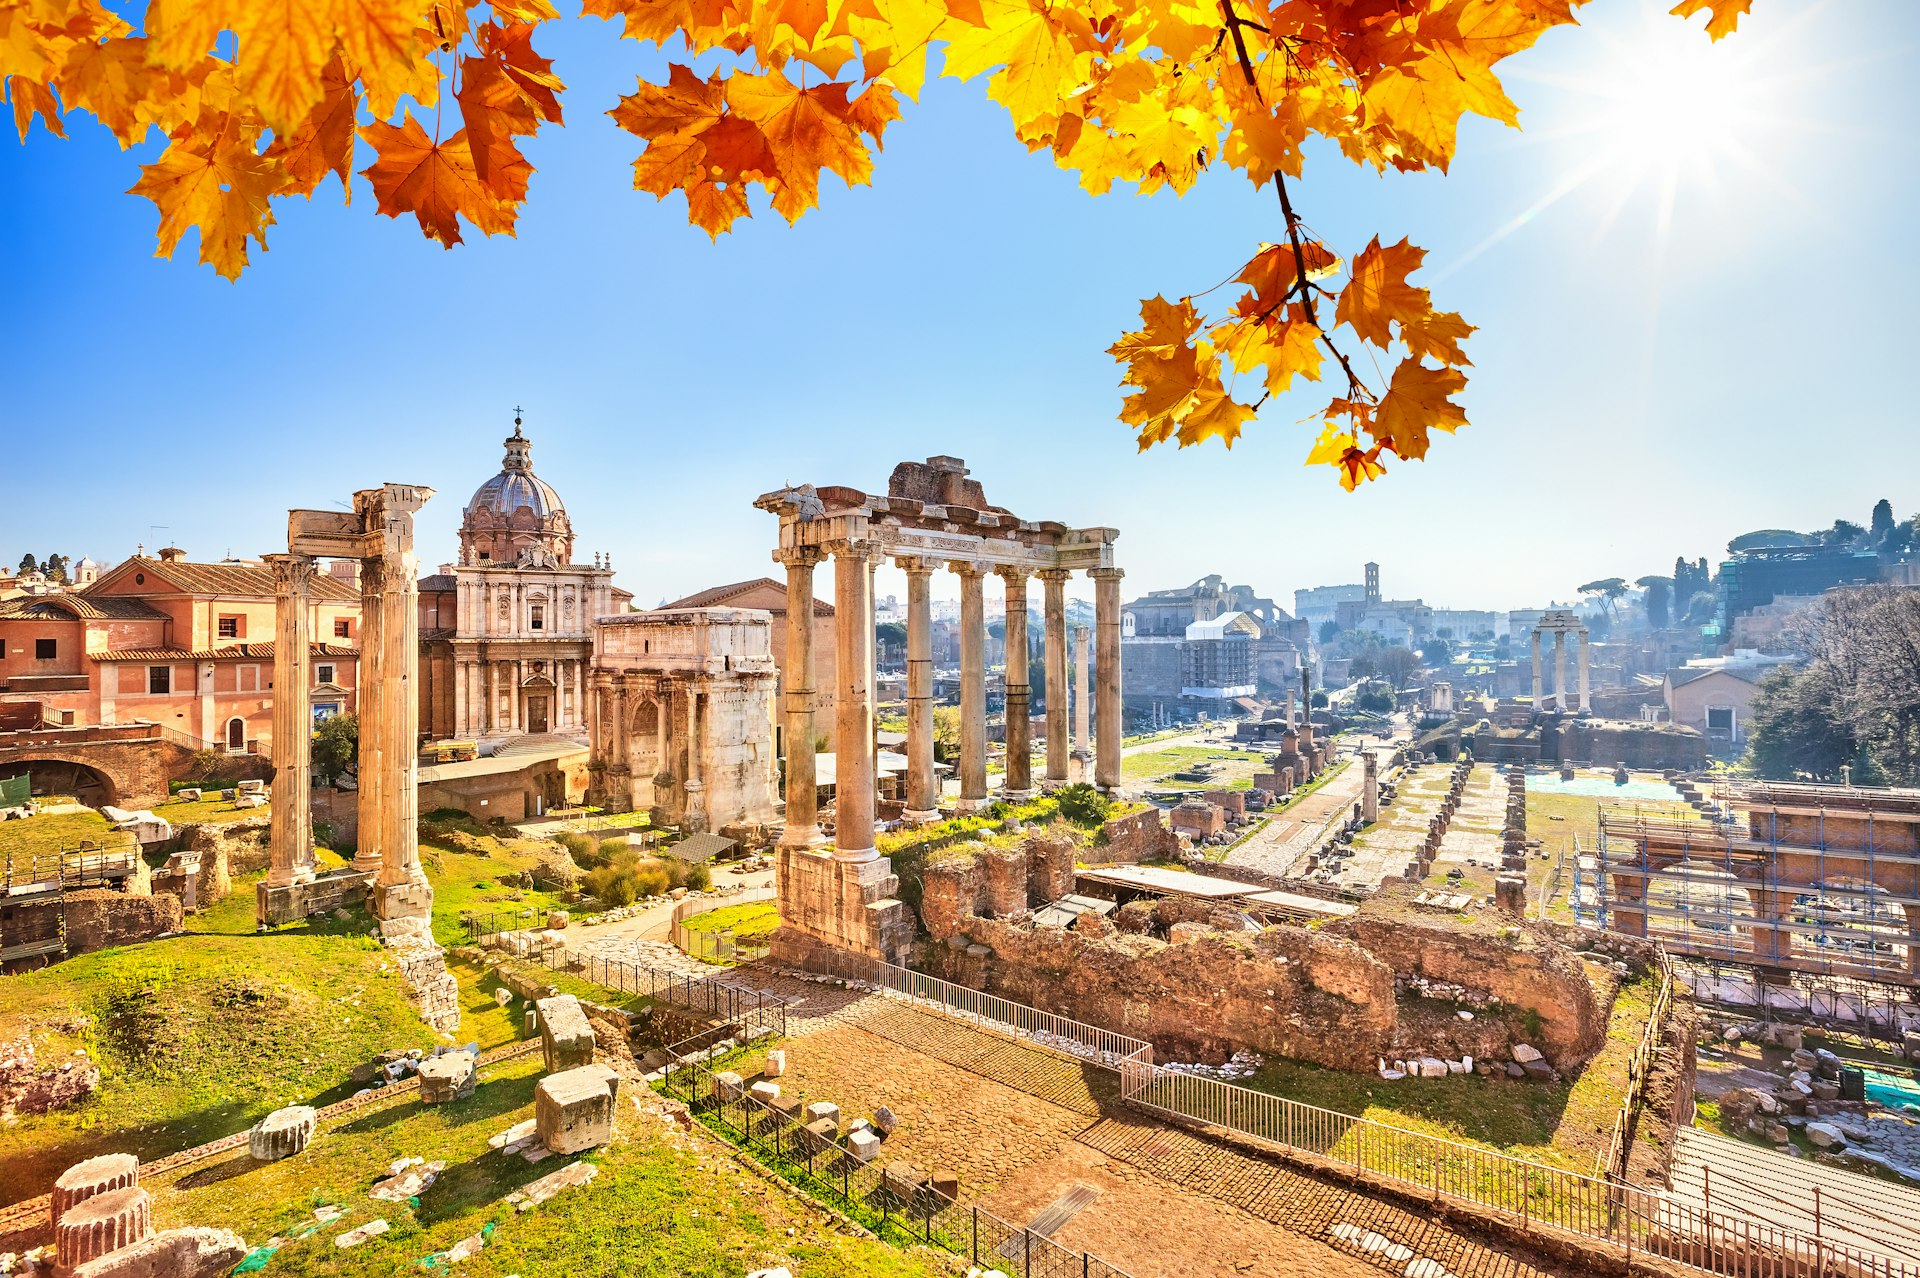 Roman ruins are shown in the fall.